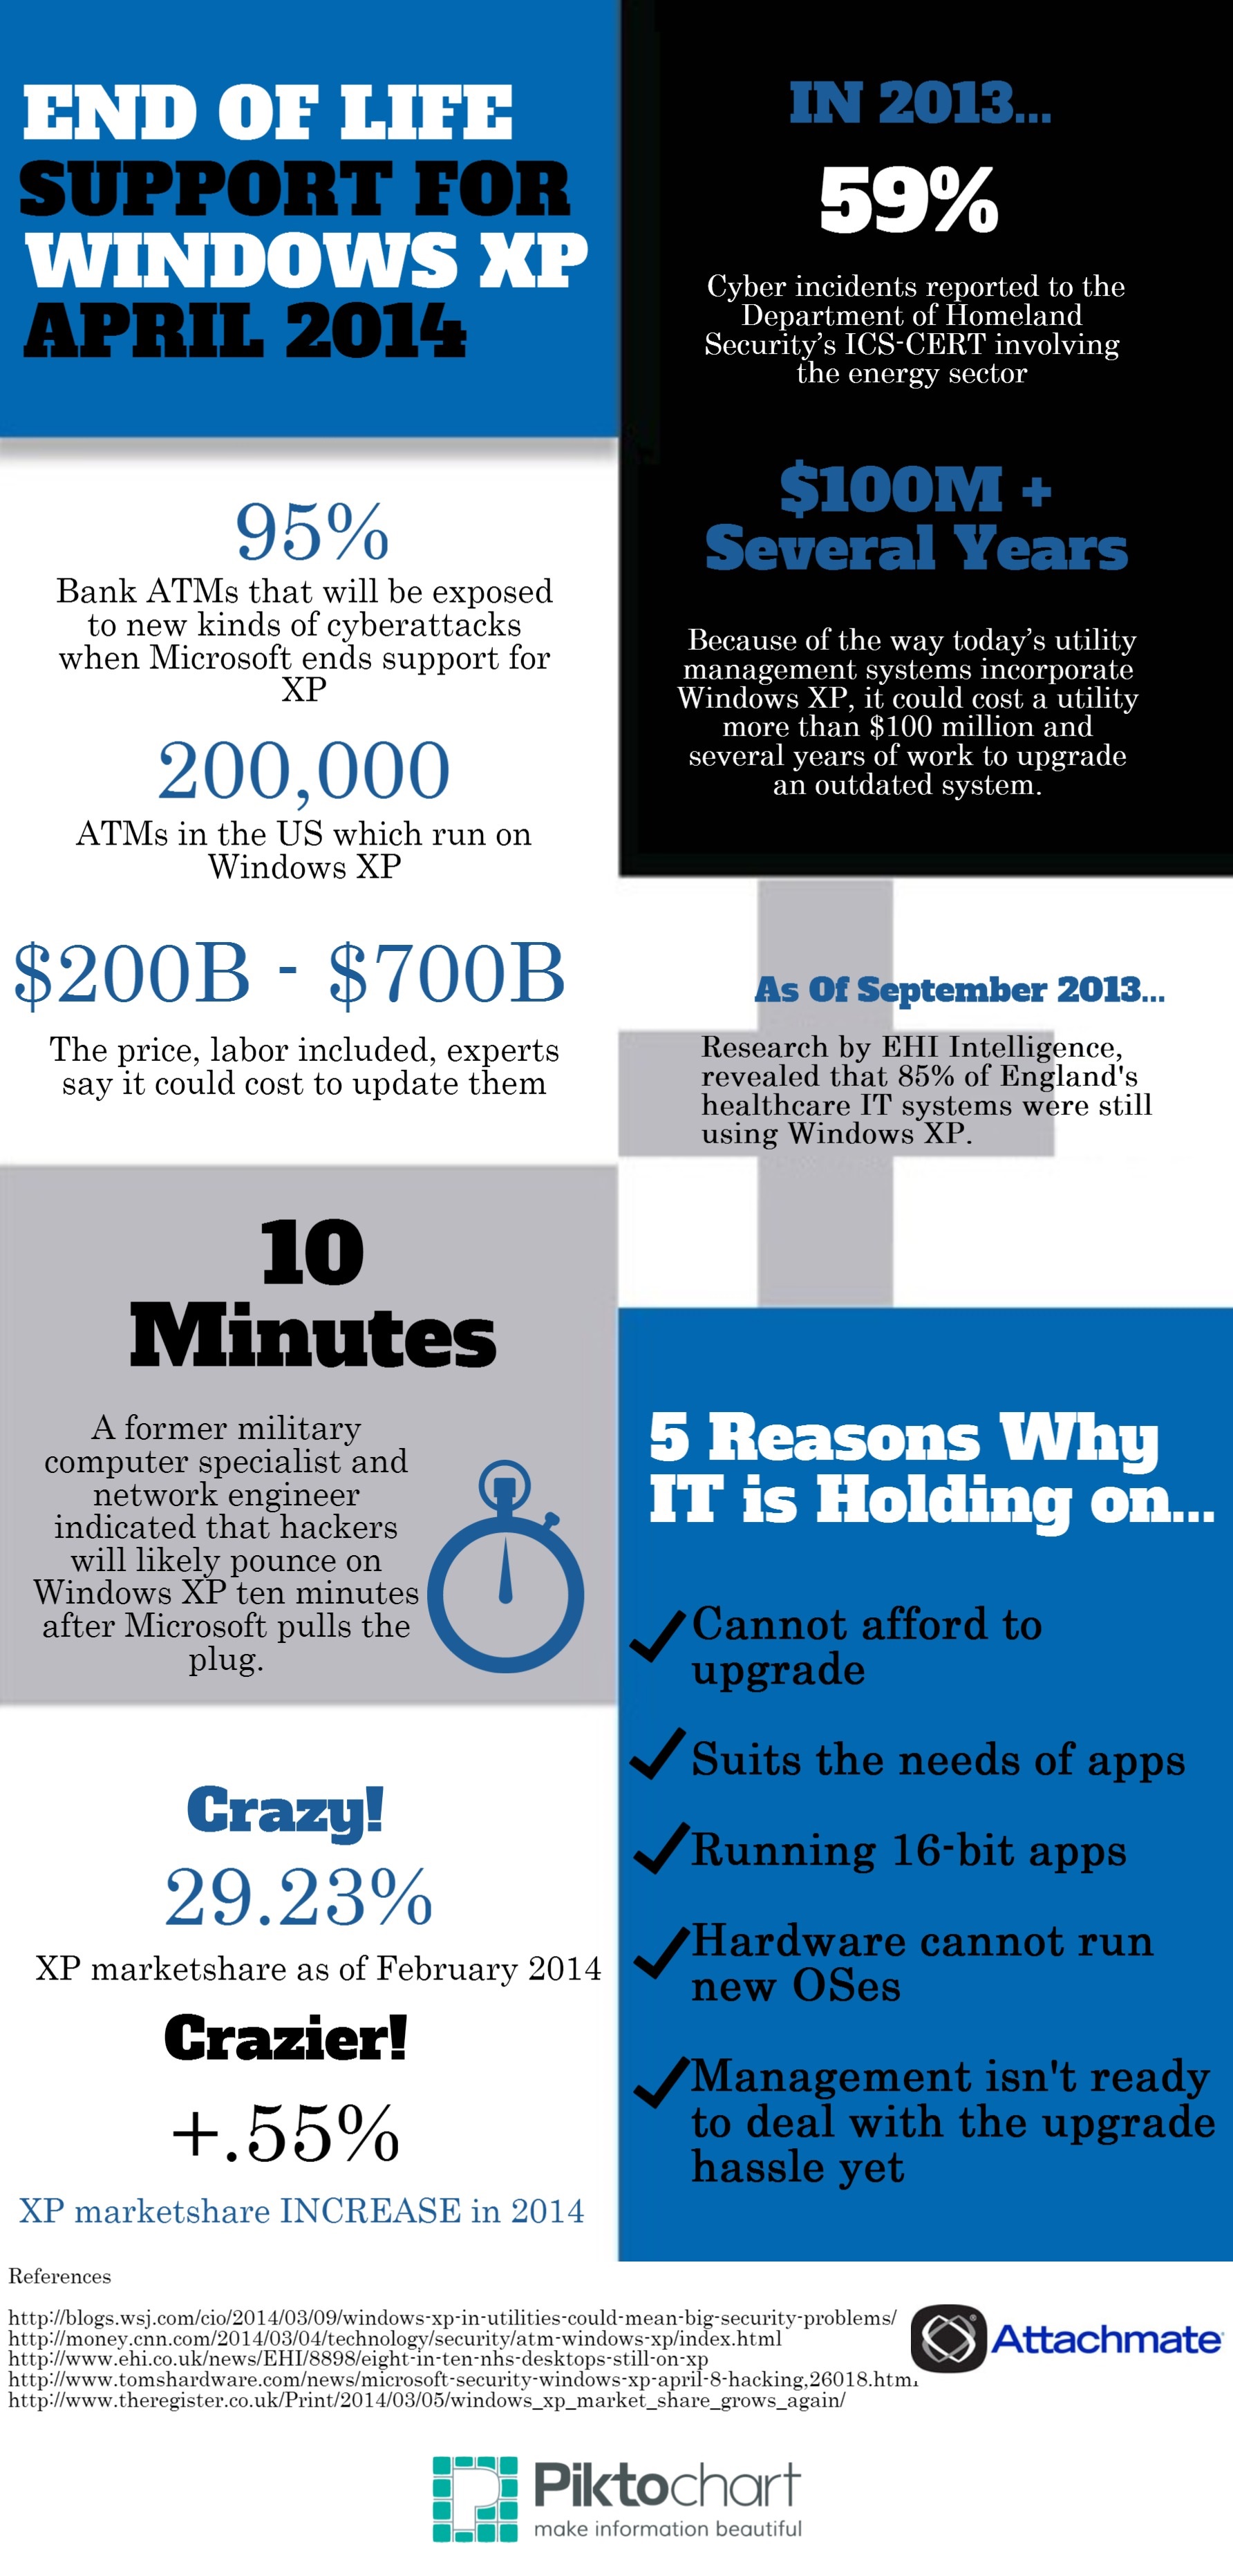 Are you ready for the end of Windows XP support? This infographic illustrates what it means for users.